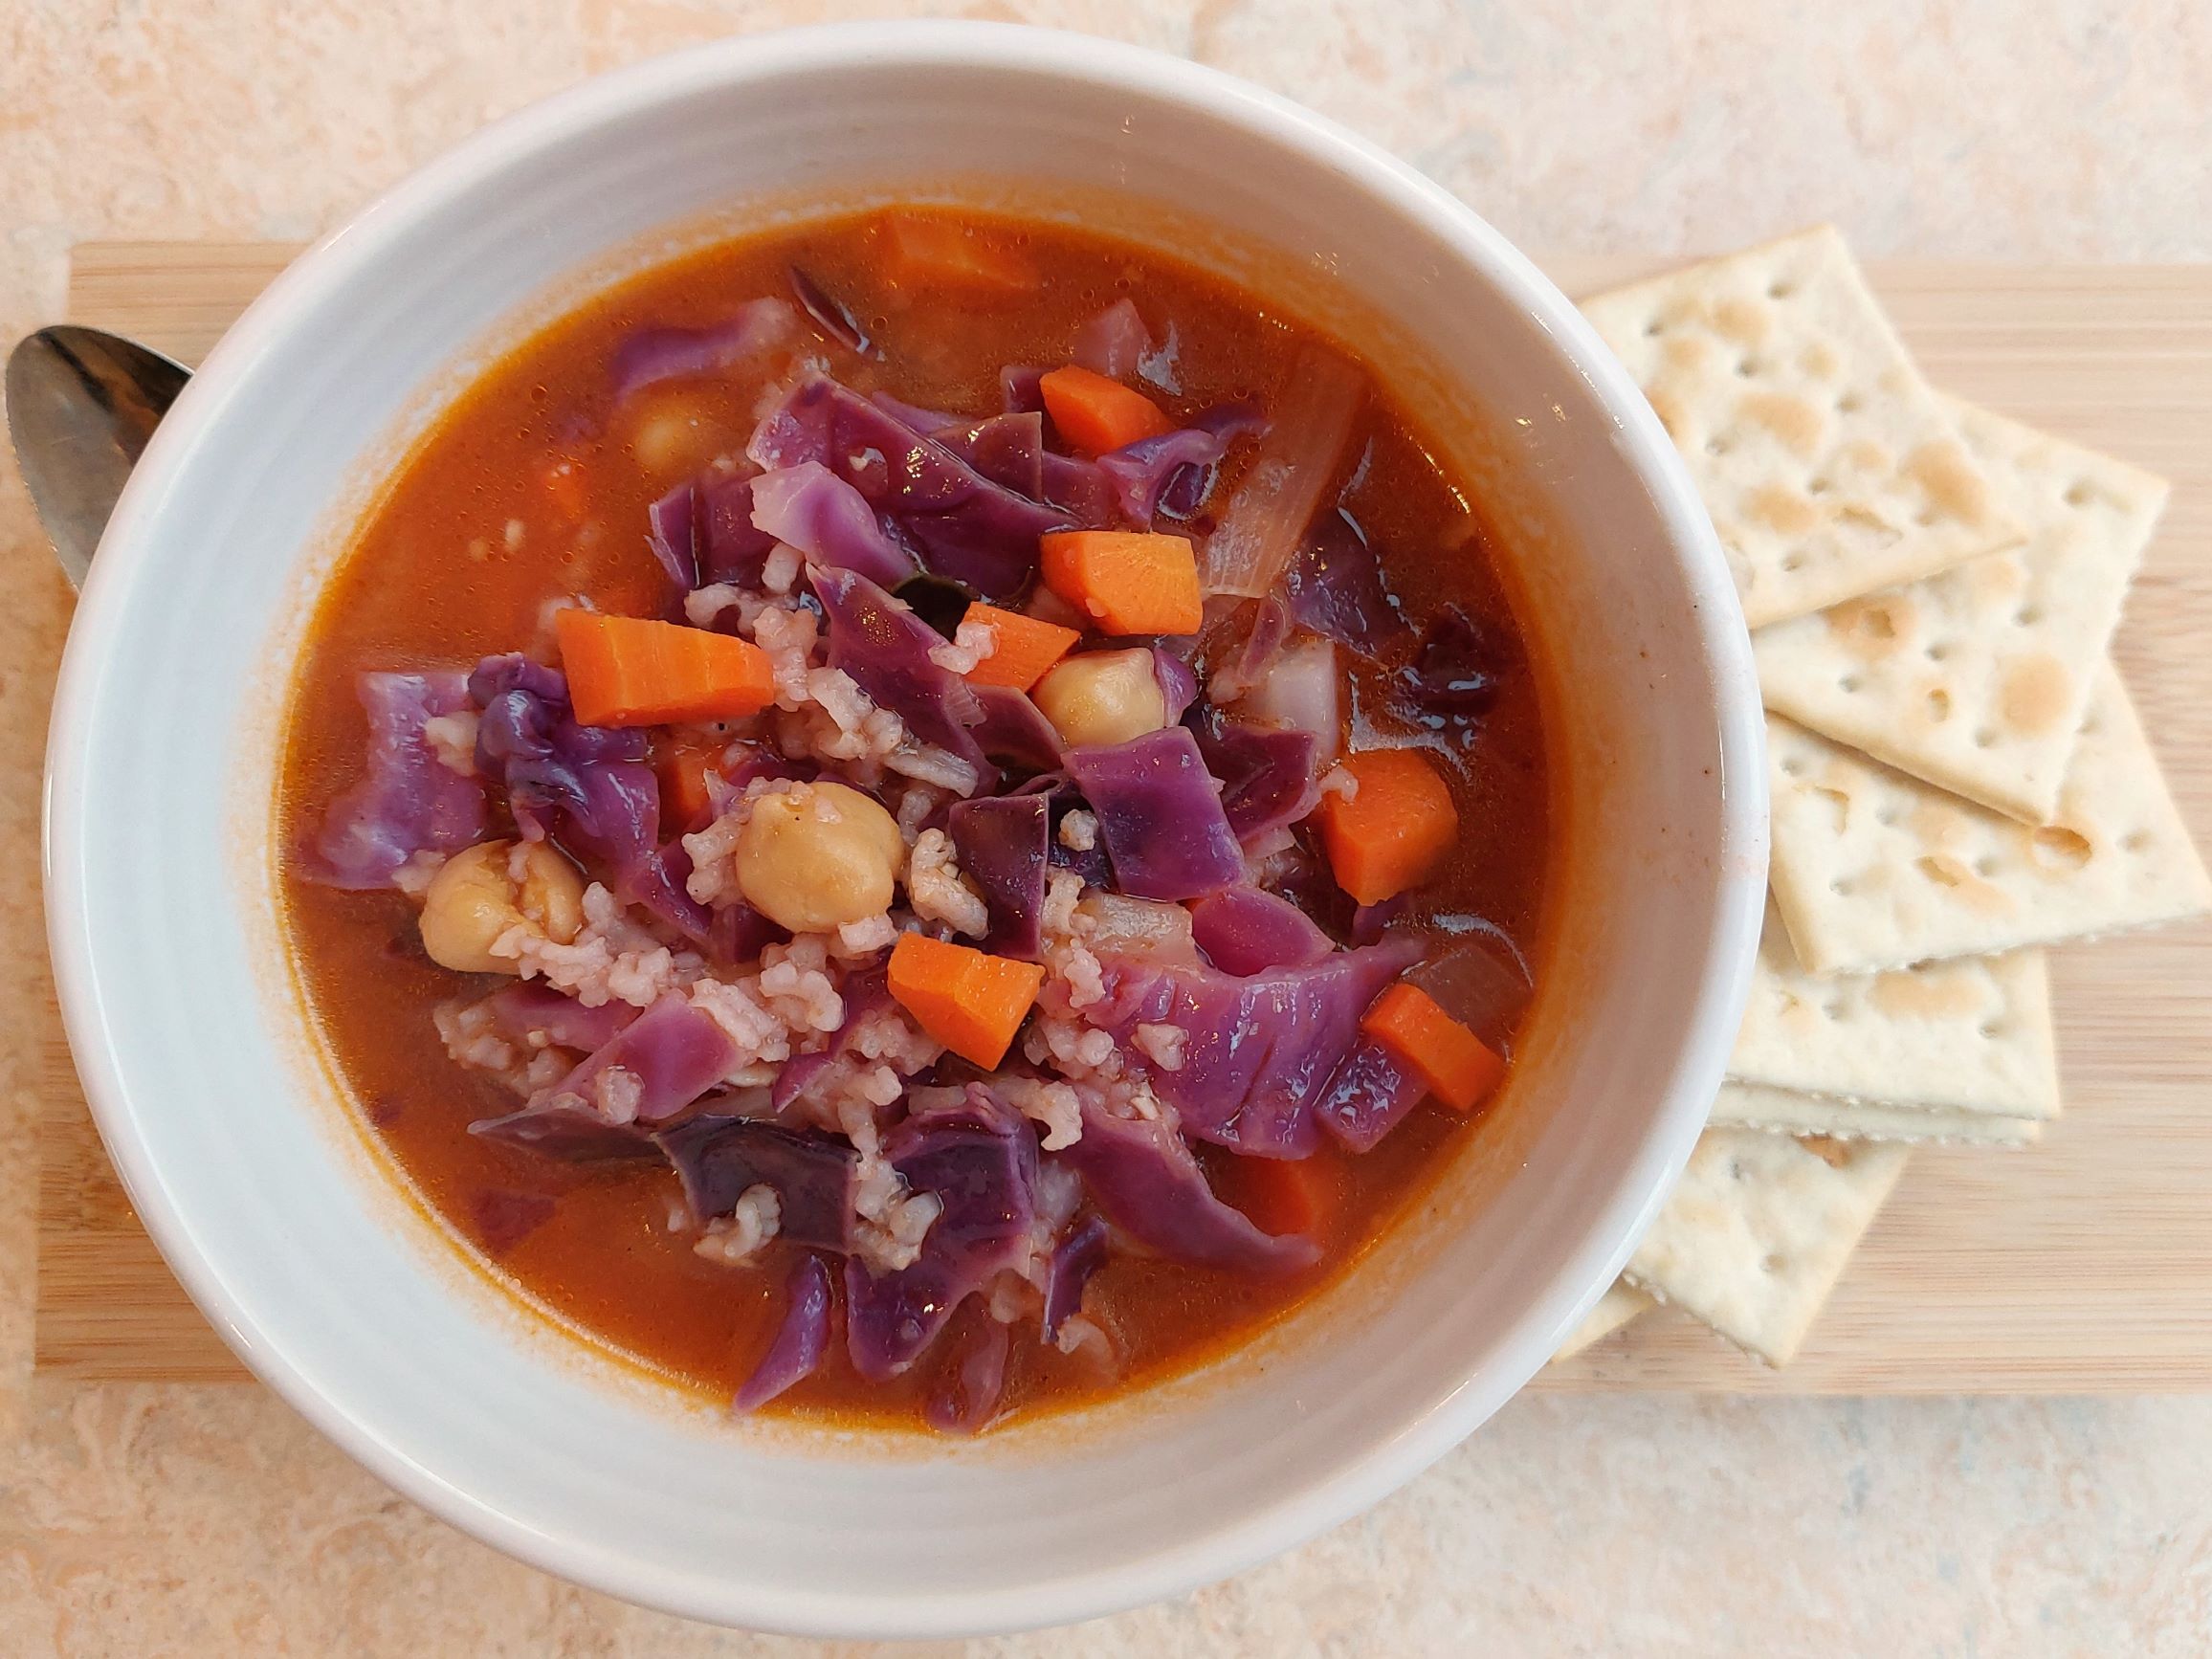 Chickpea and Cabbage Soup